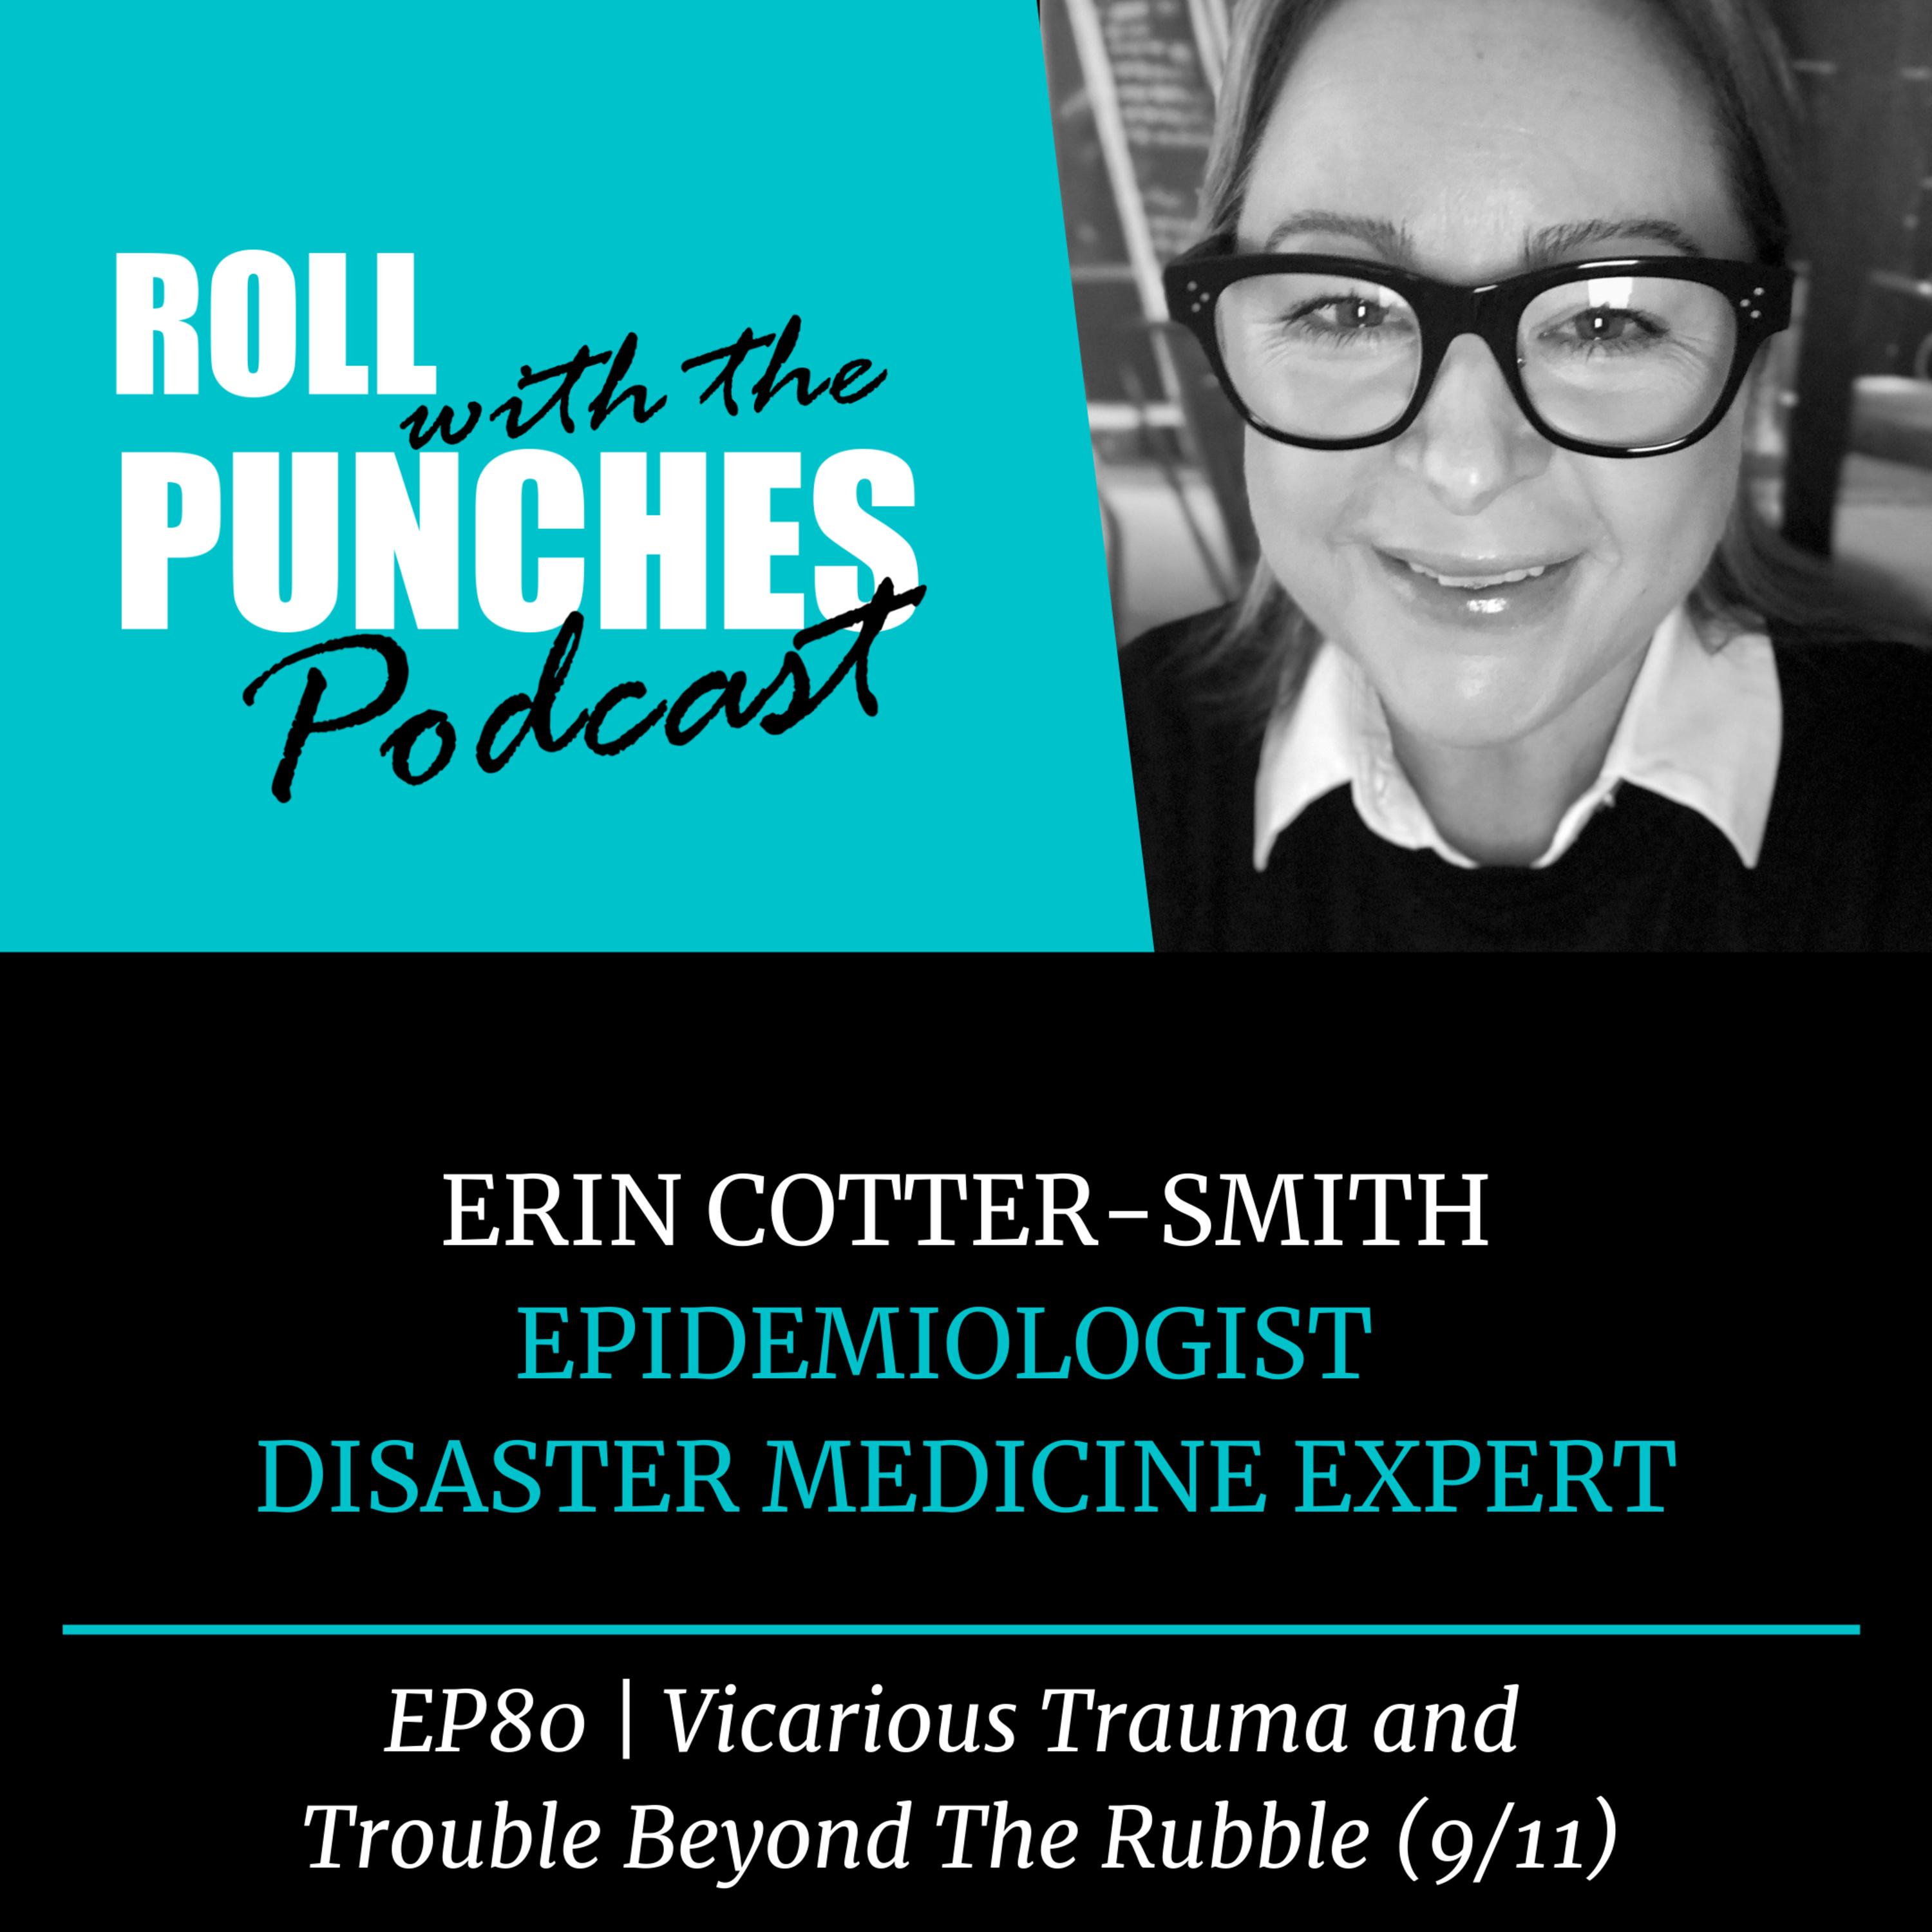 EP80 Vicarious Trauma And Trouble Beyond The Rubble (9/11) | Erin Cotter-Smith